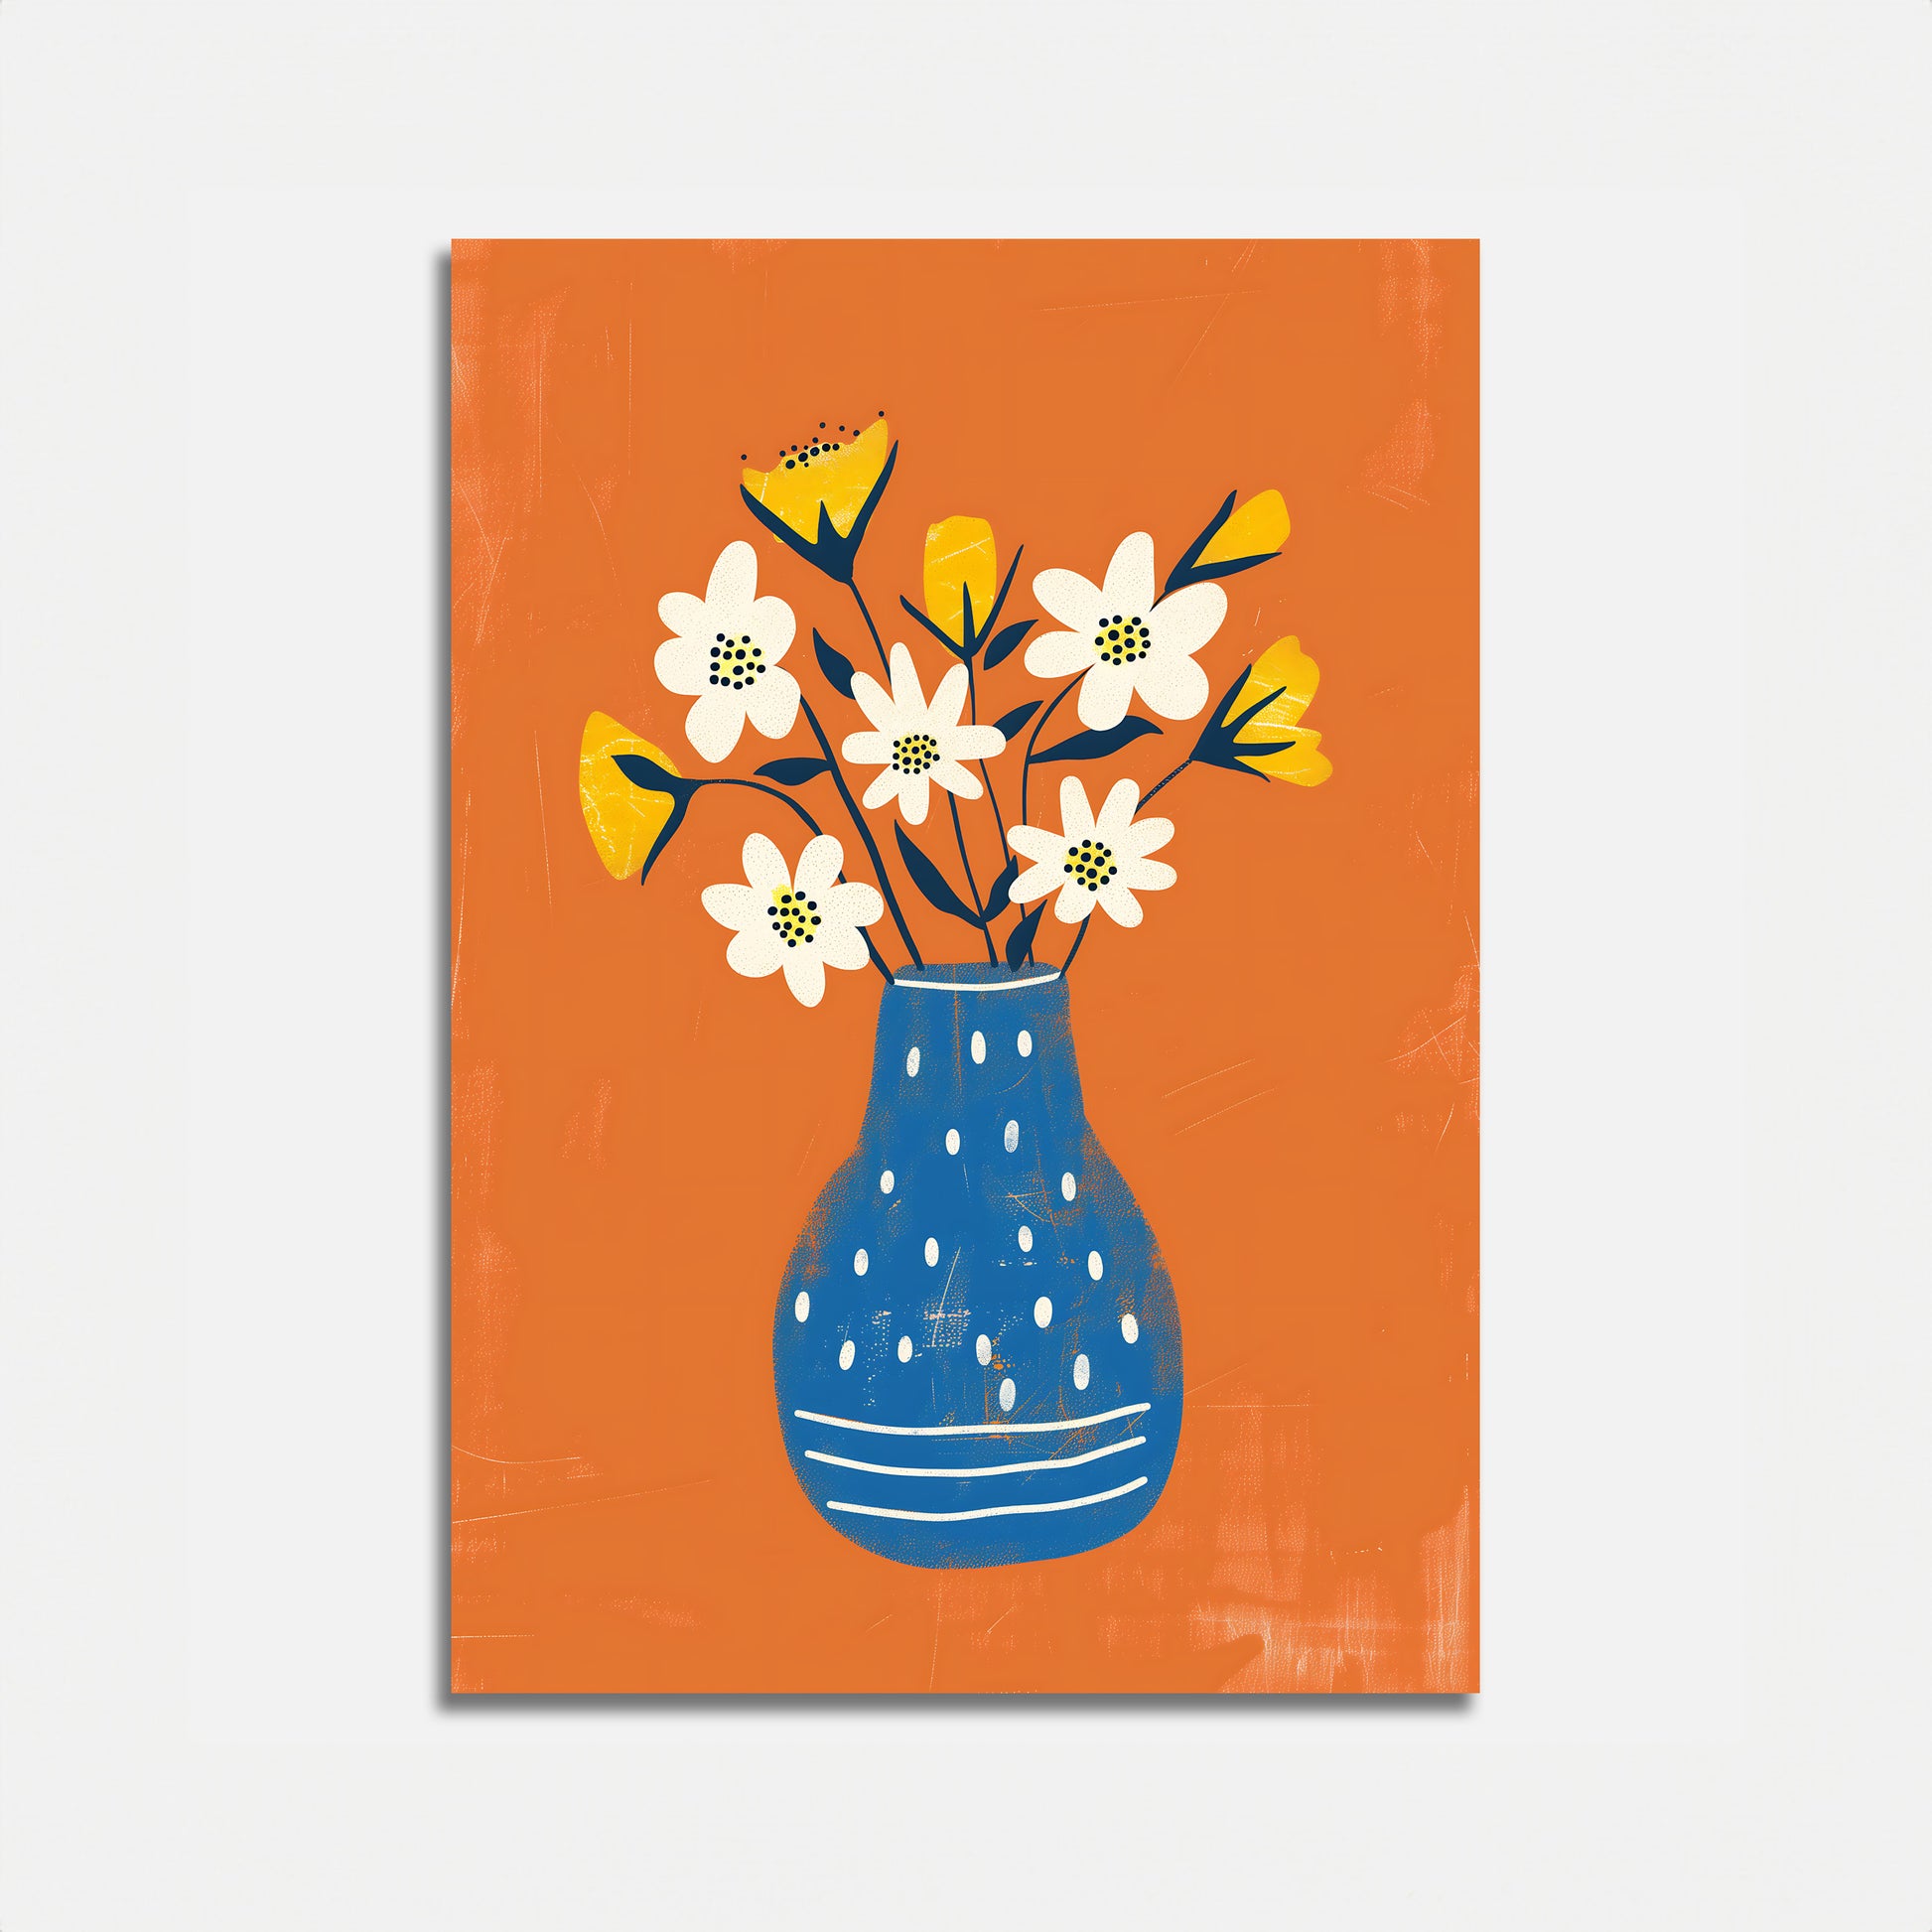 A colorful illustration of flowers in a blue vase against an orange background.